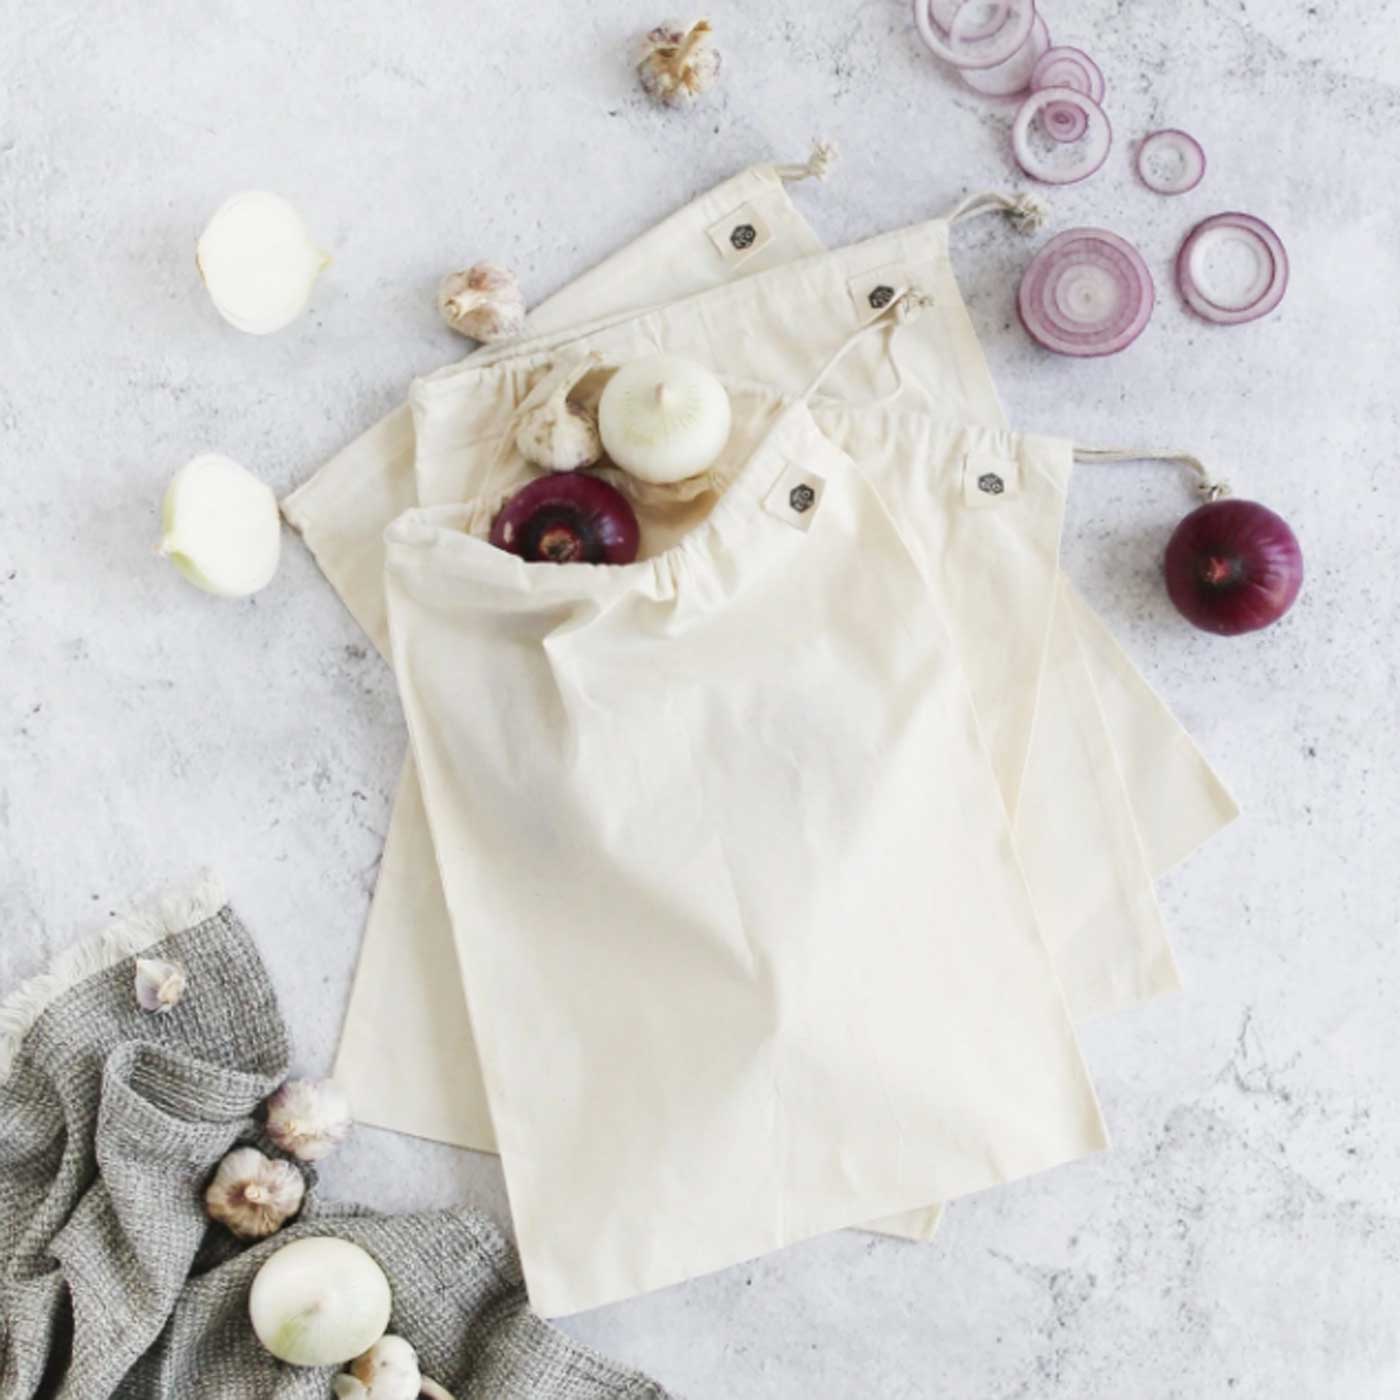 Set of 4 sustainable cotton and plastic-free reusable produce bags